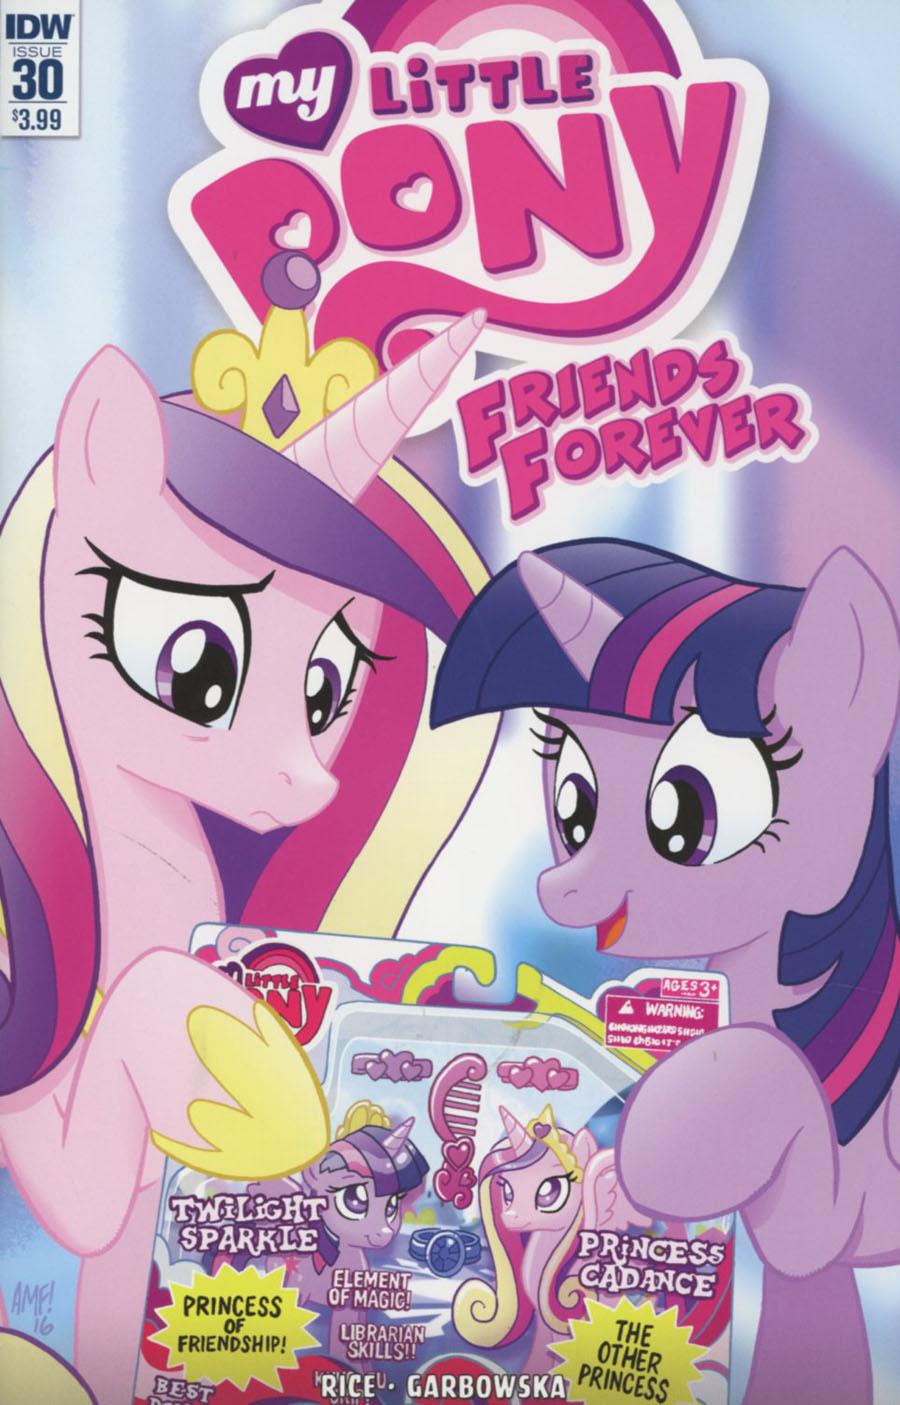 My Little Pony Friends Forever Vol. 1 #30